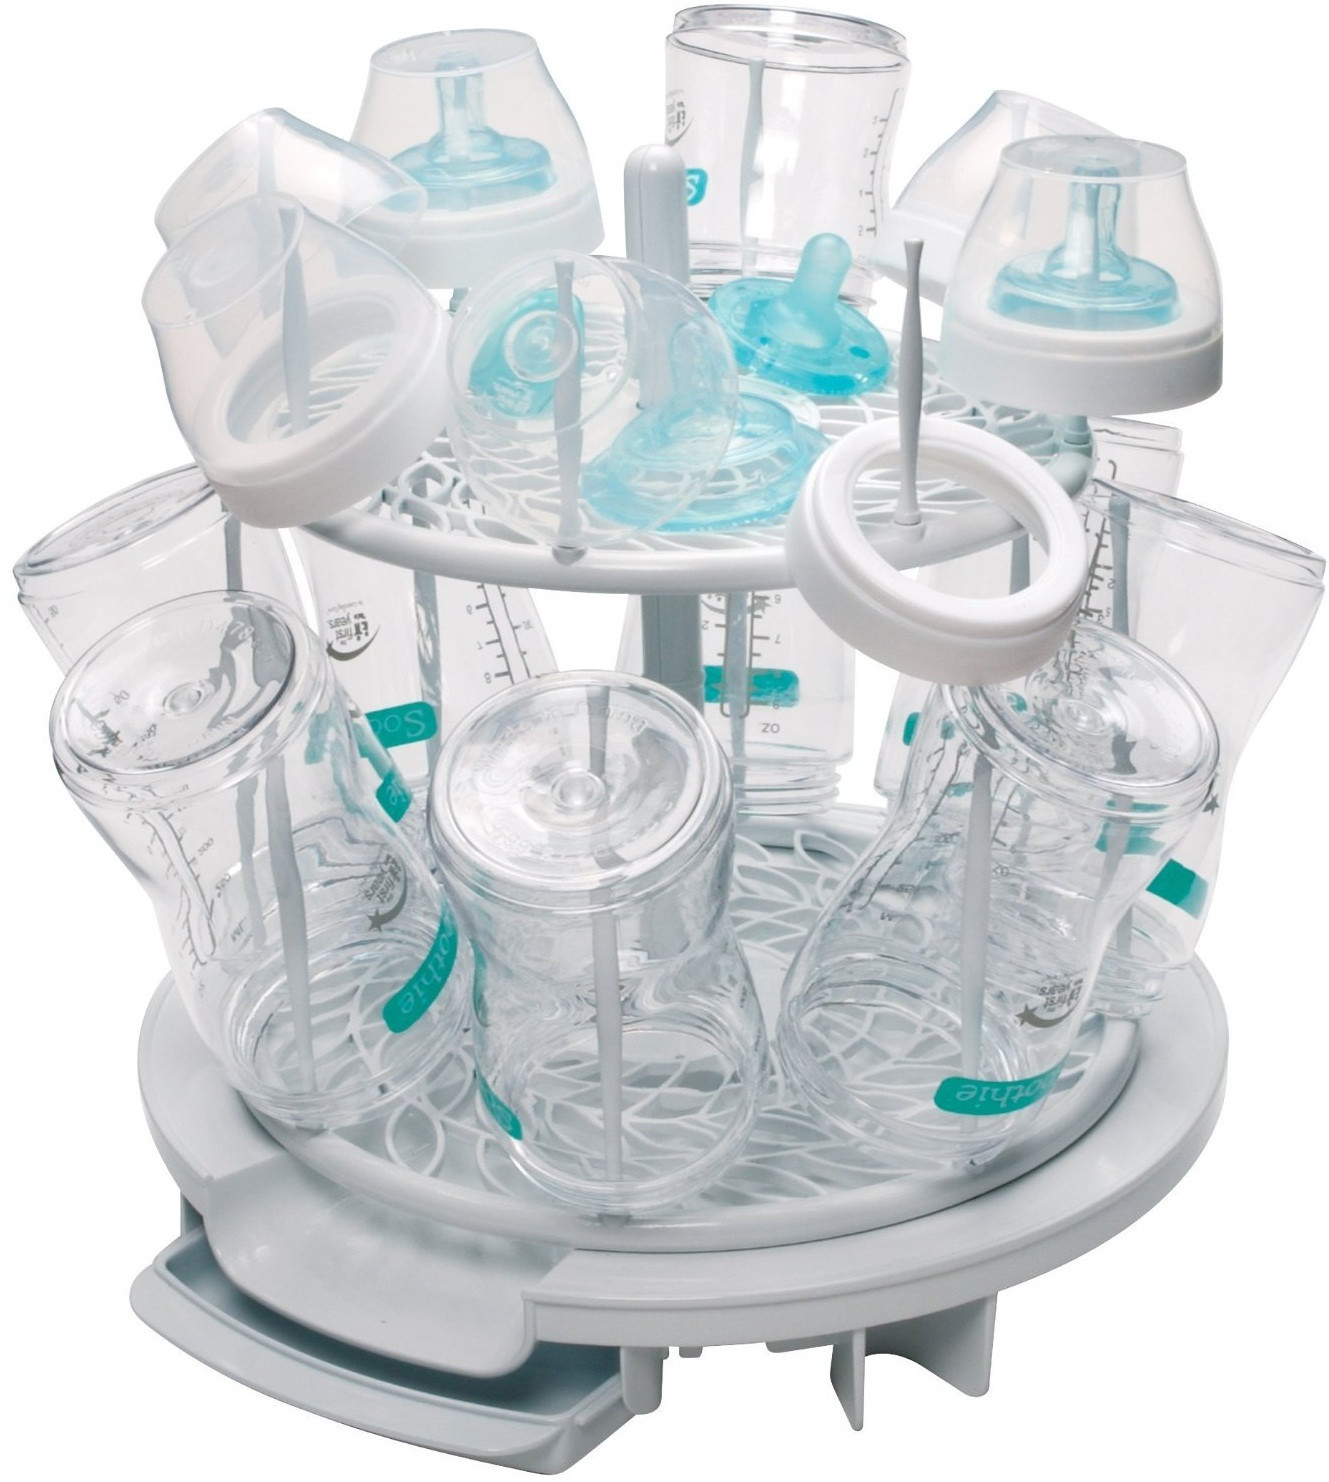 Baby Bottle Organizer
 The First Years Spinning Drying Rack Baby Cinema